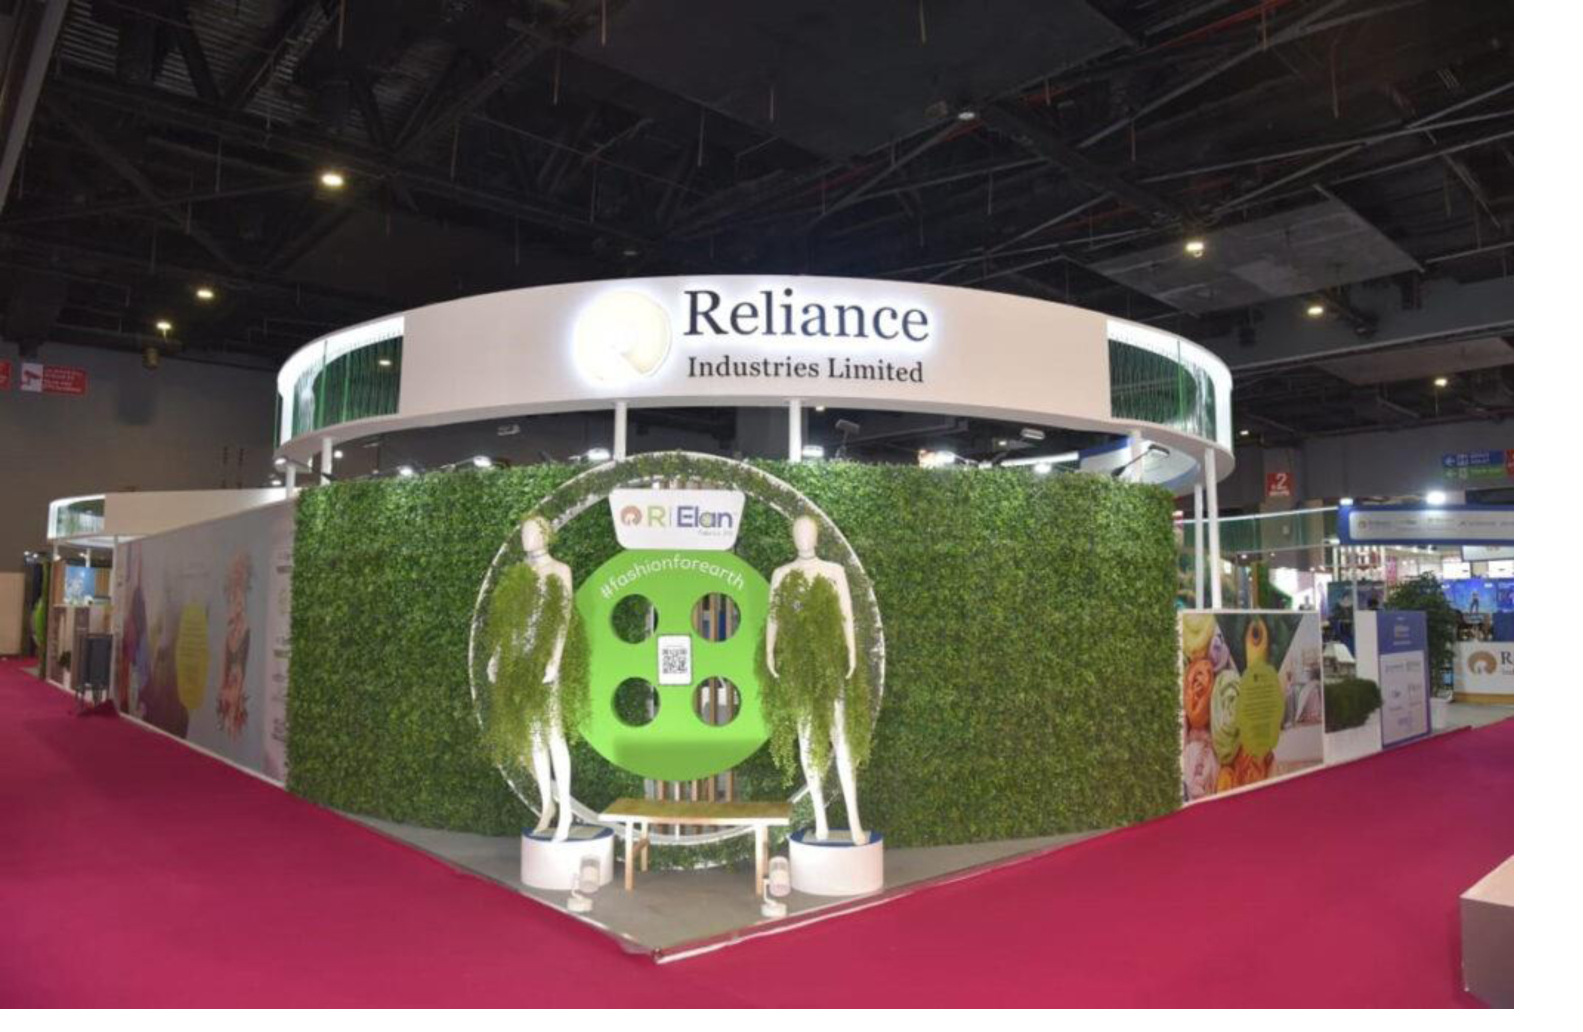 Reliance’ eco-friendly innovation, introduced ECOTHERM™ in BharatTex